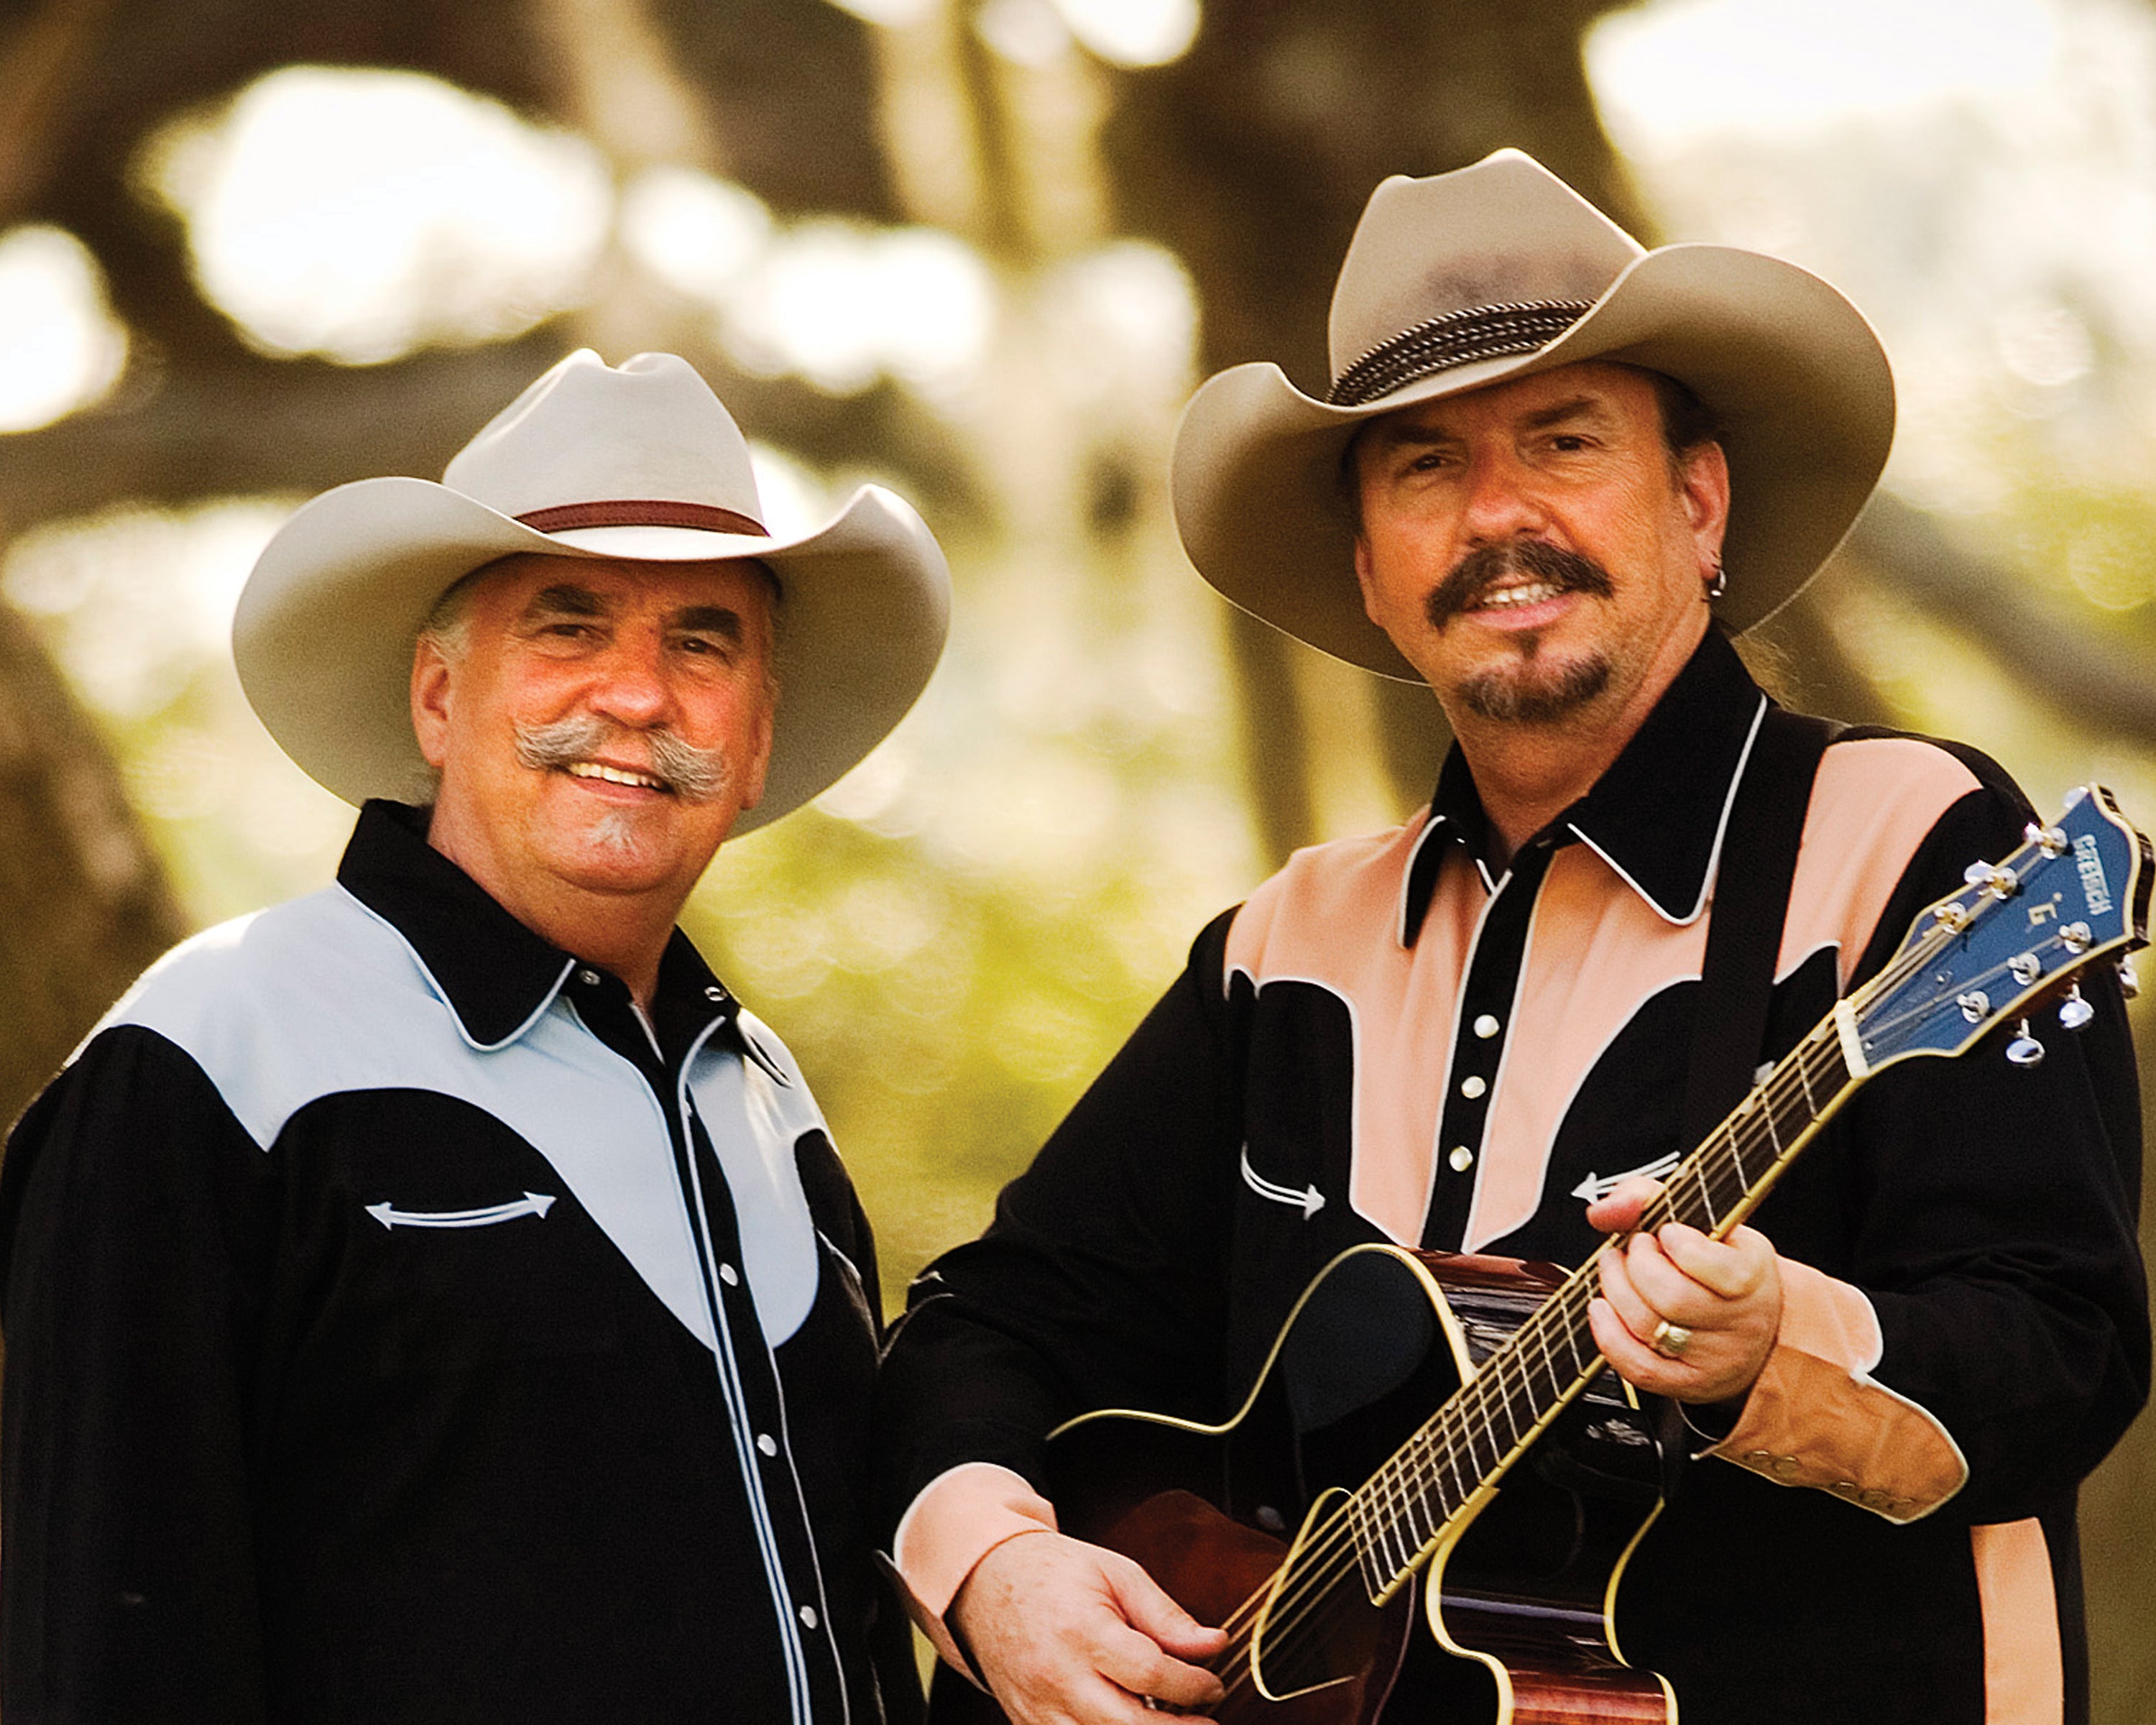 Bellamy Brothers at John T Floore Country Store